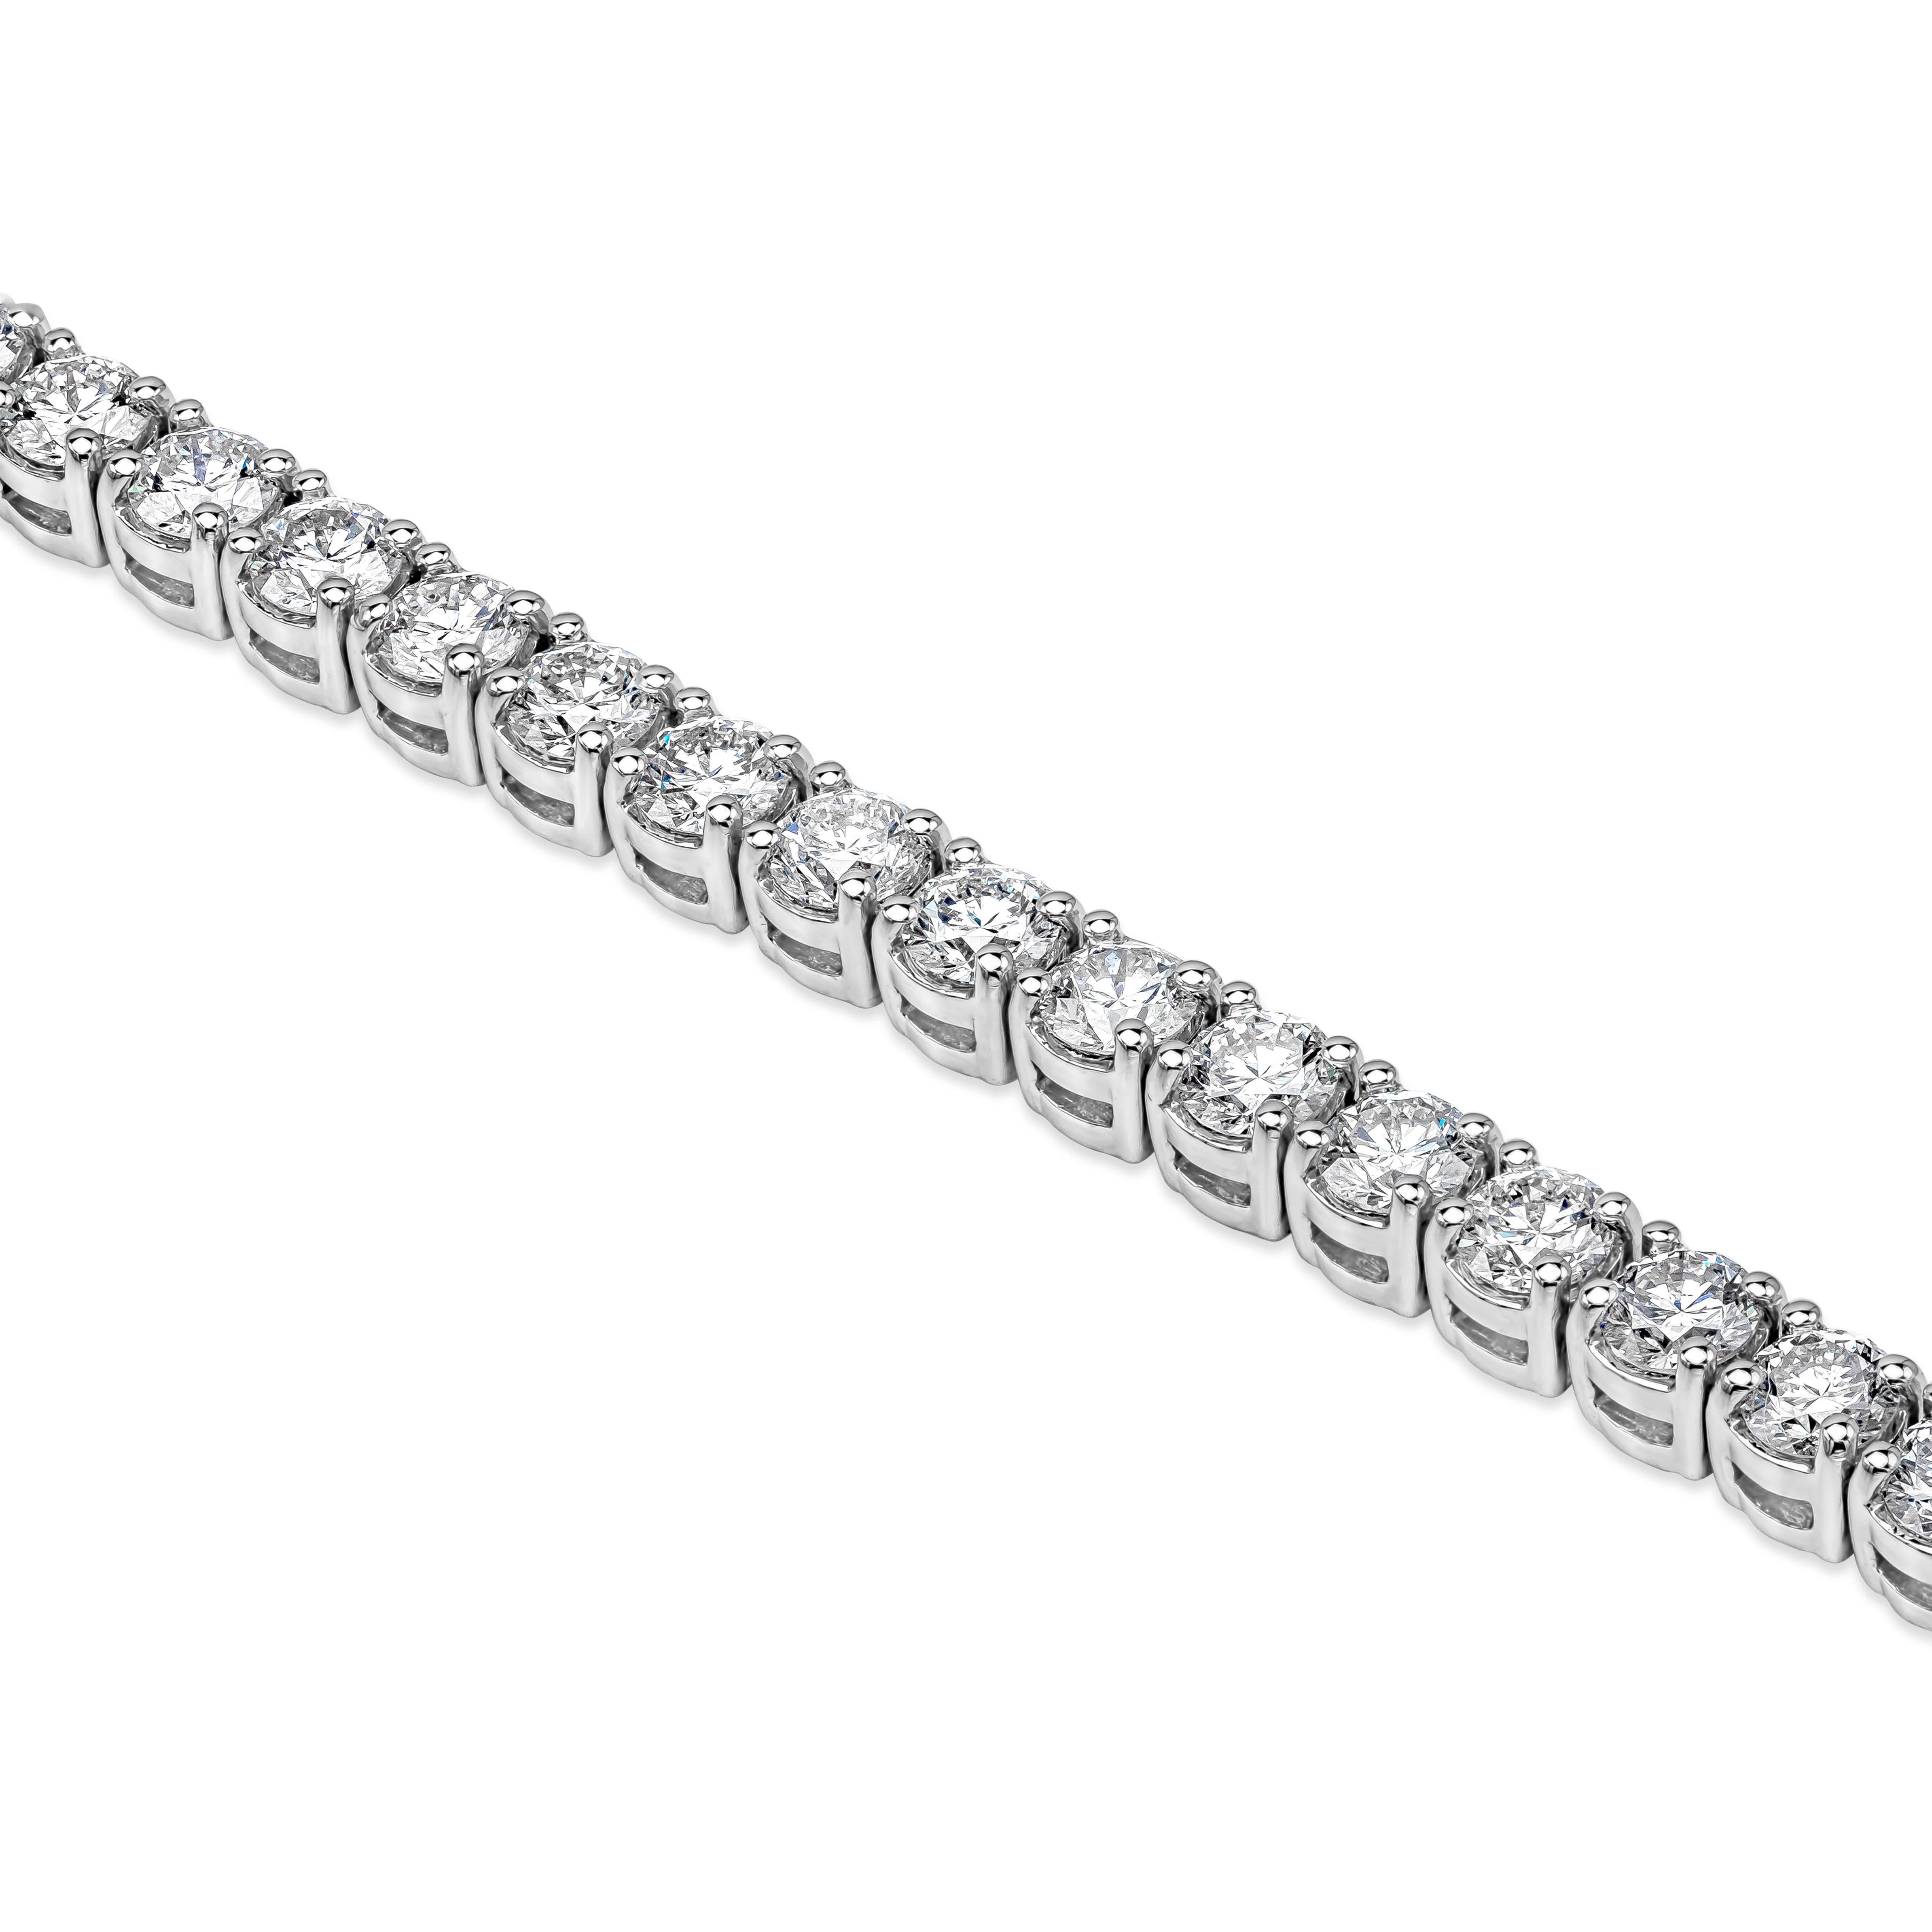 A classic tennis bracelet style showcasing a row of round brilliant diamonds weighing 7.00 carats total, each set in an 18k white gold basket. Double lock mechanism for maximum safety. 

Style available in different price ranges. Prices are based on